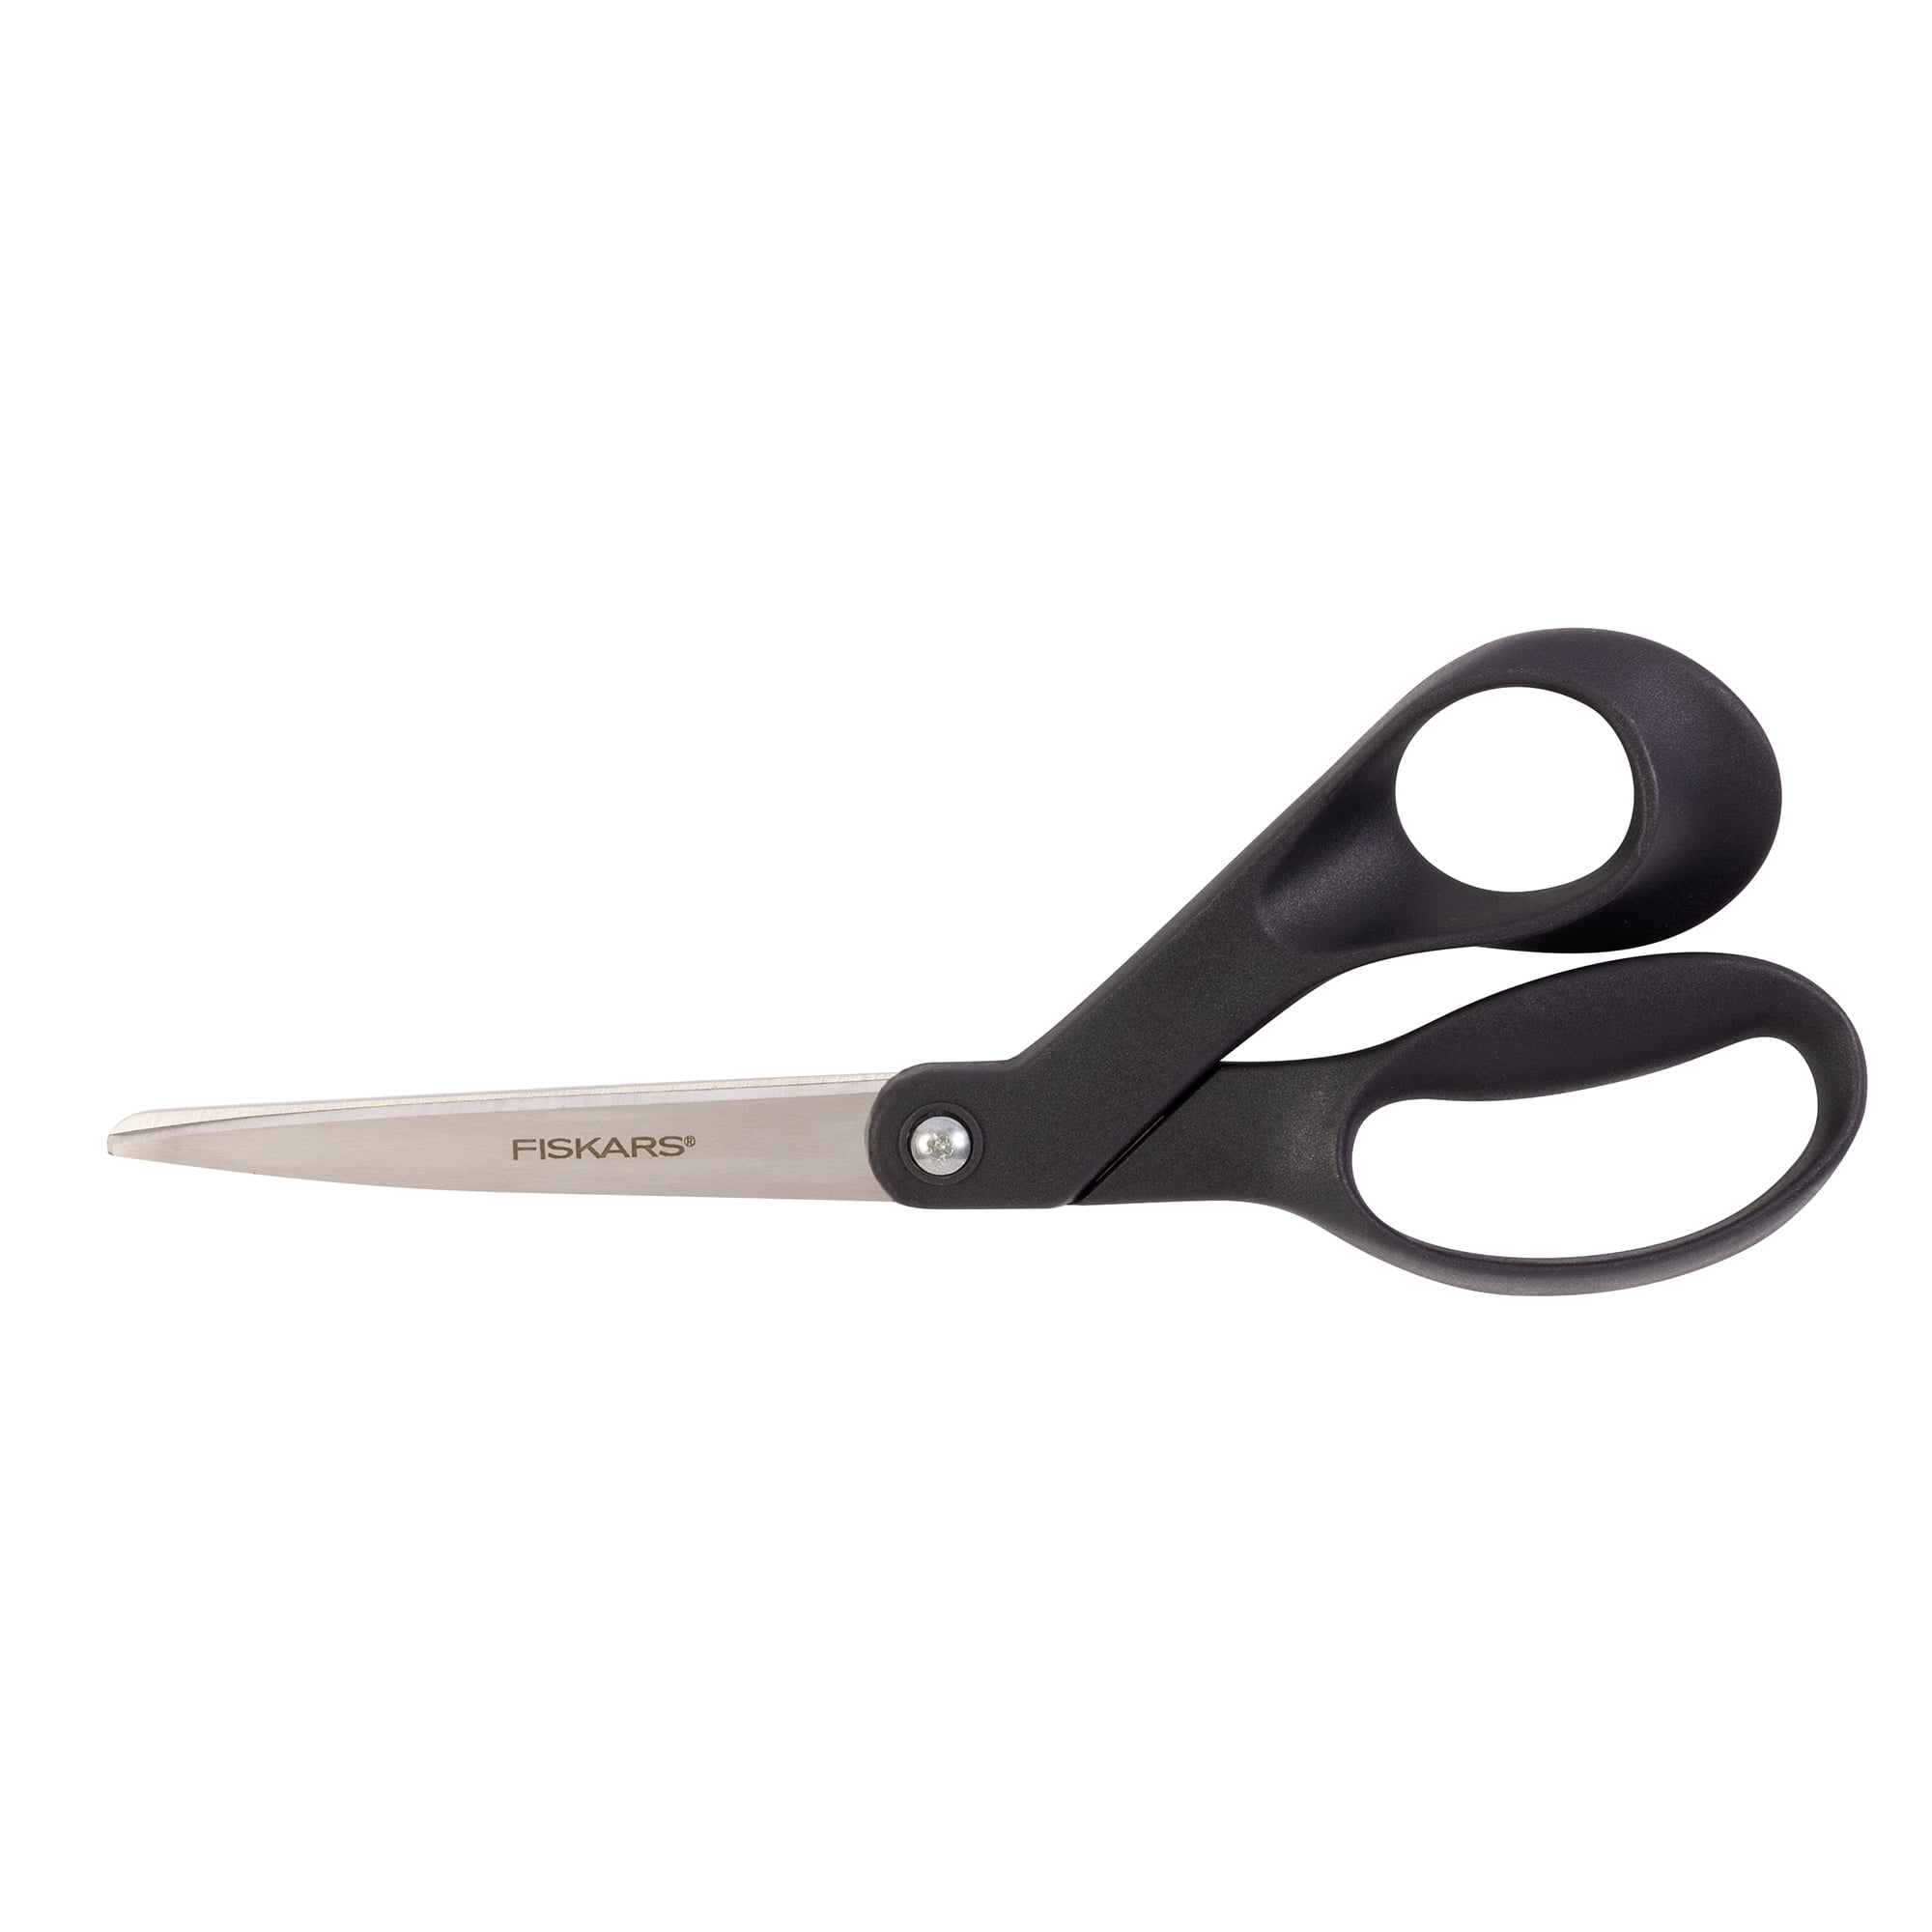 Fiskars 6411501997586 Poultry Shear, Total Length: 25 cm, Quality  Steel/Synthetic Material, one, Black